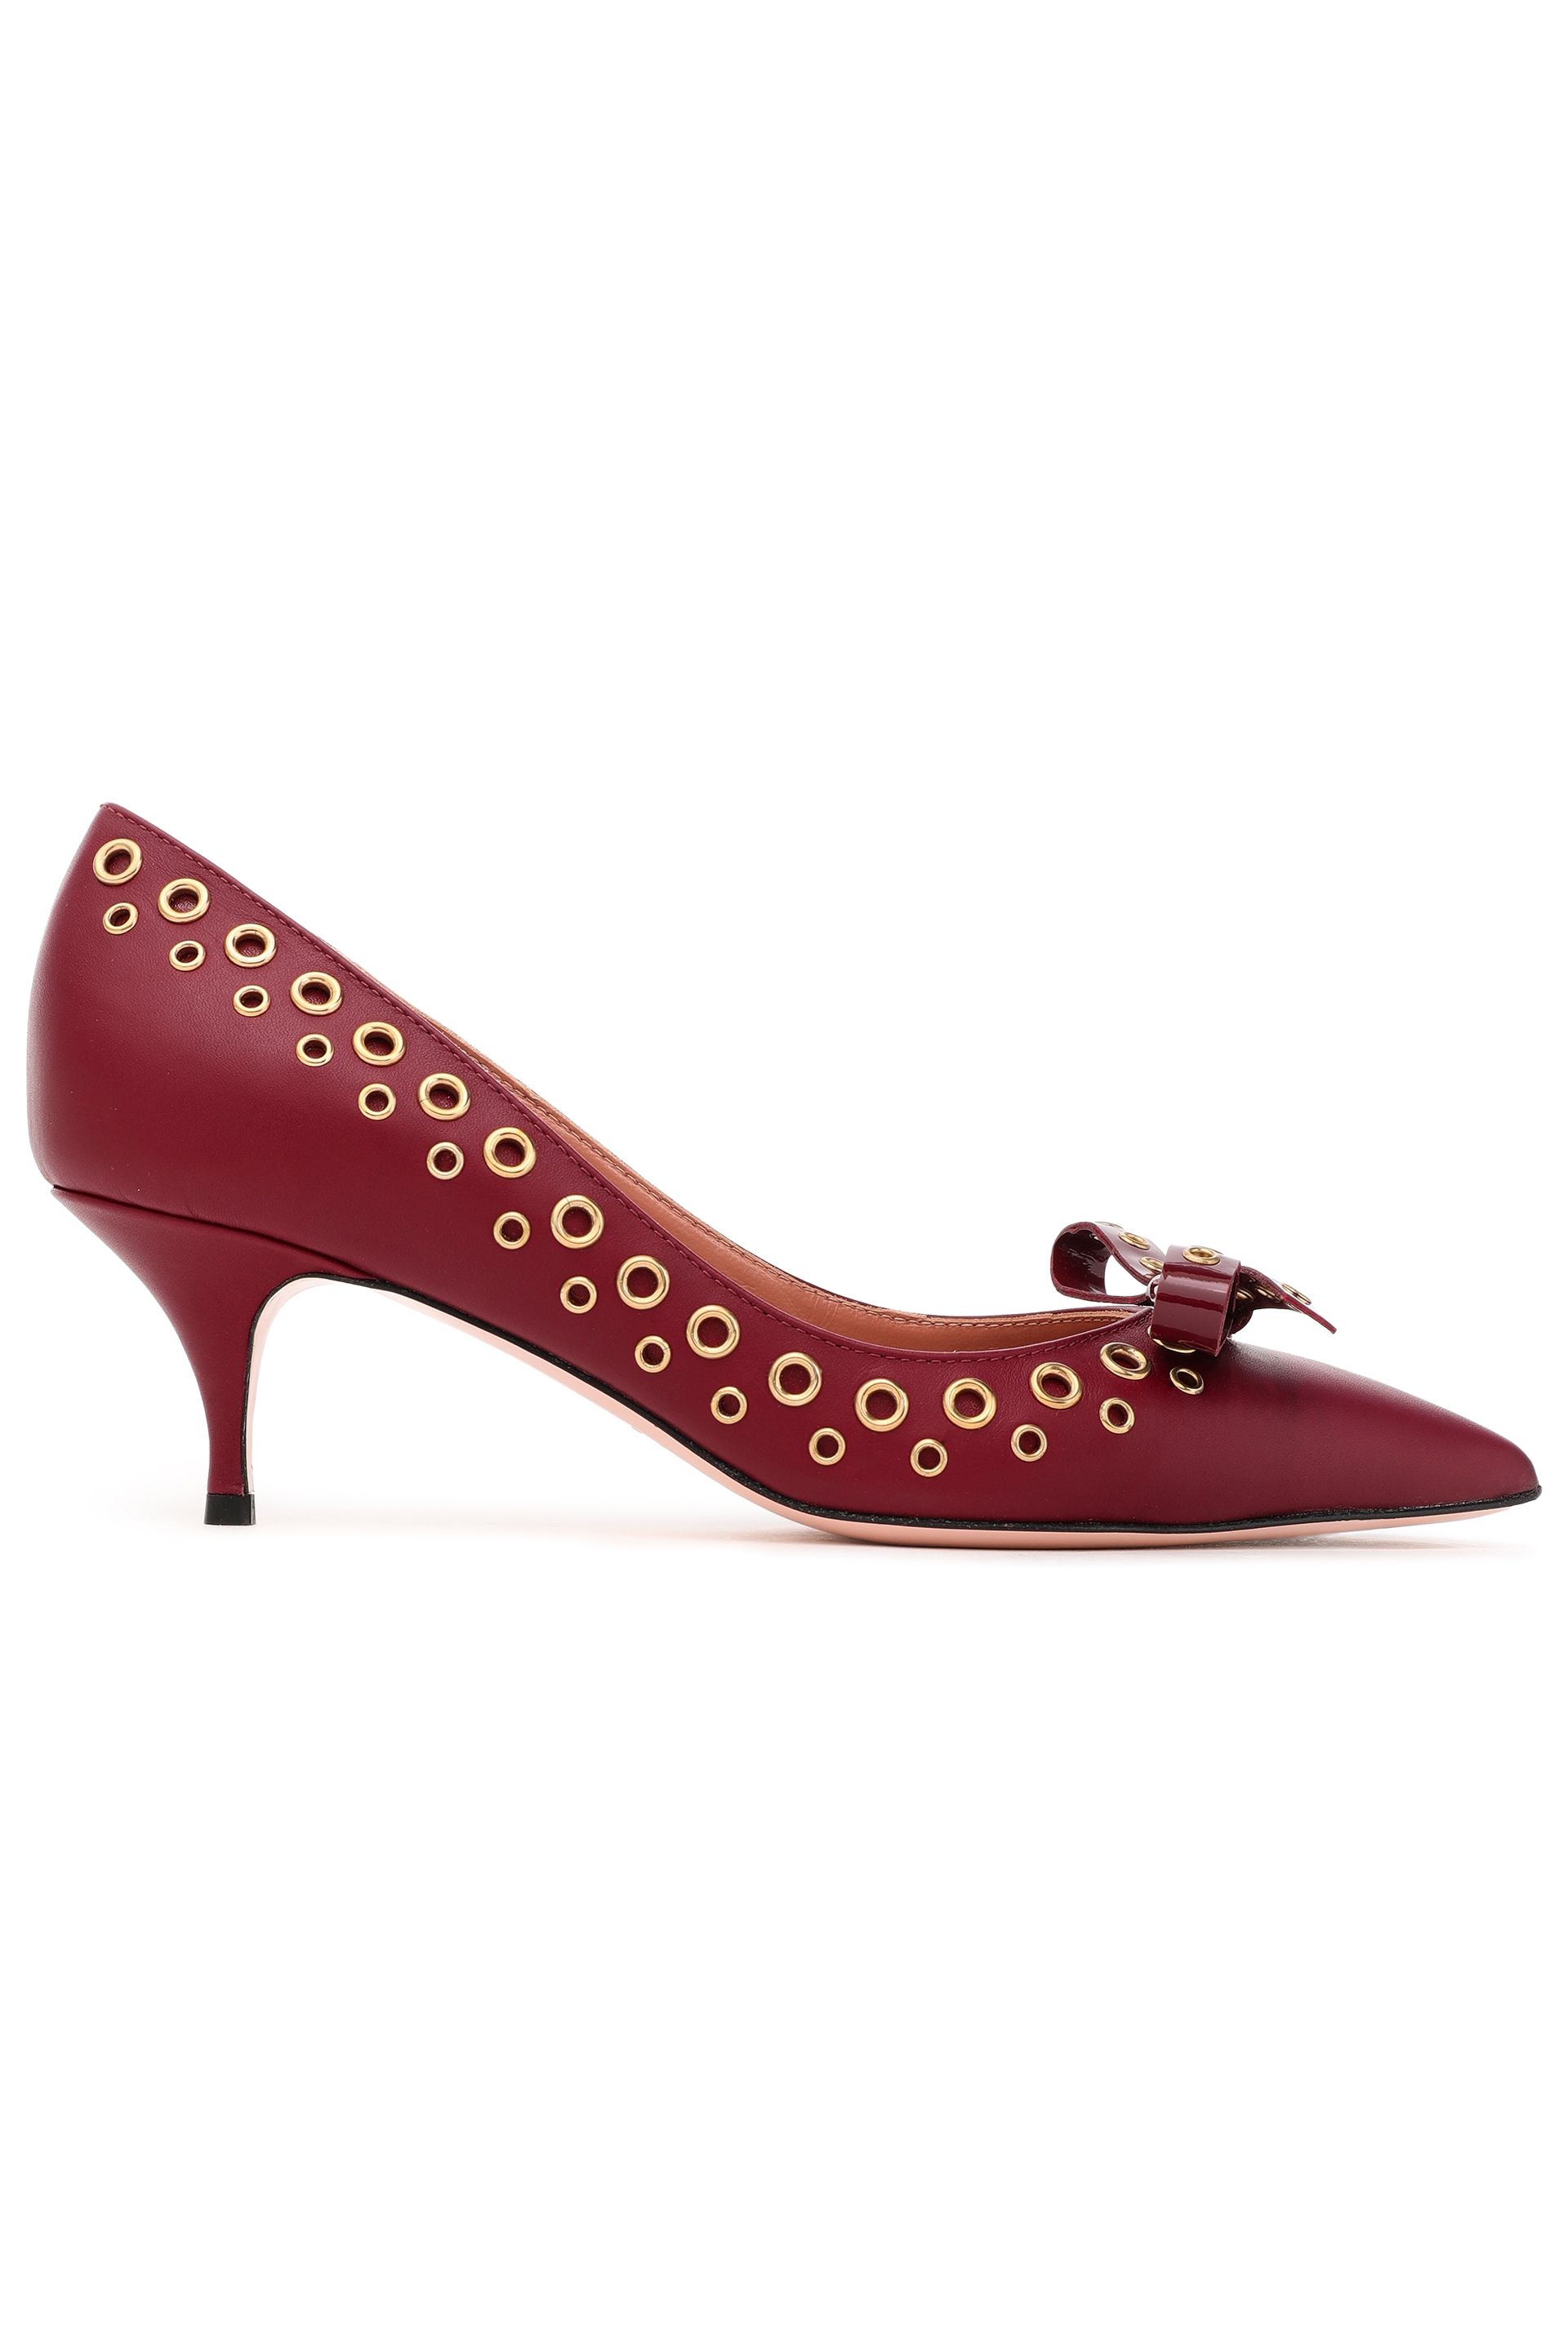 Women's Designer Pumps | Outlet Sale Up To 70% Off At THE OUTNET